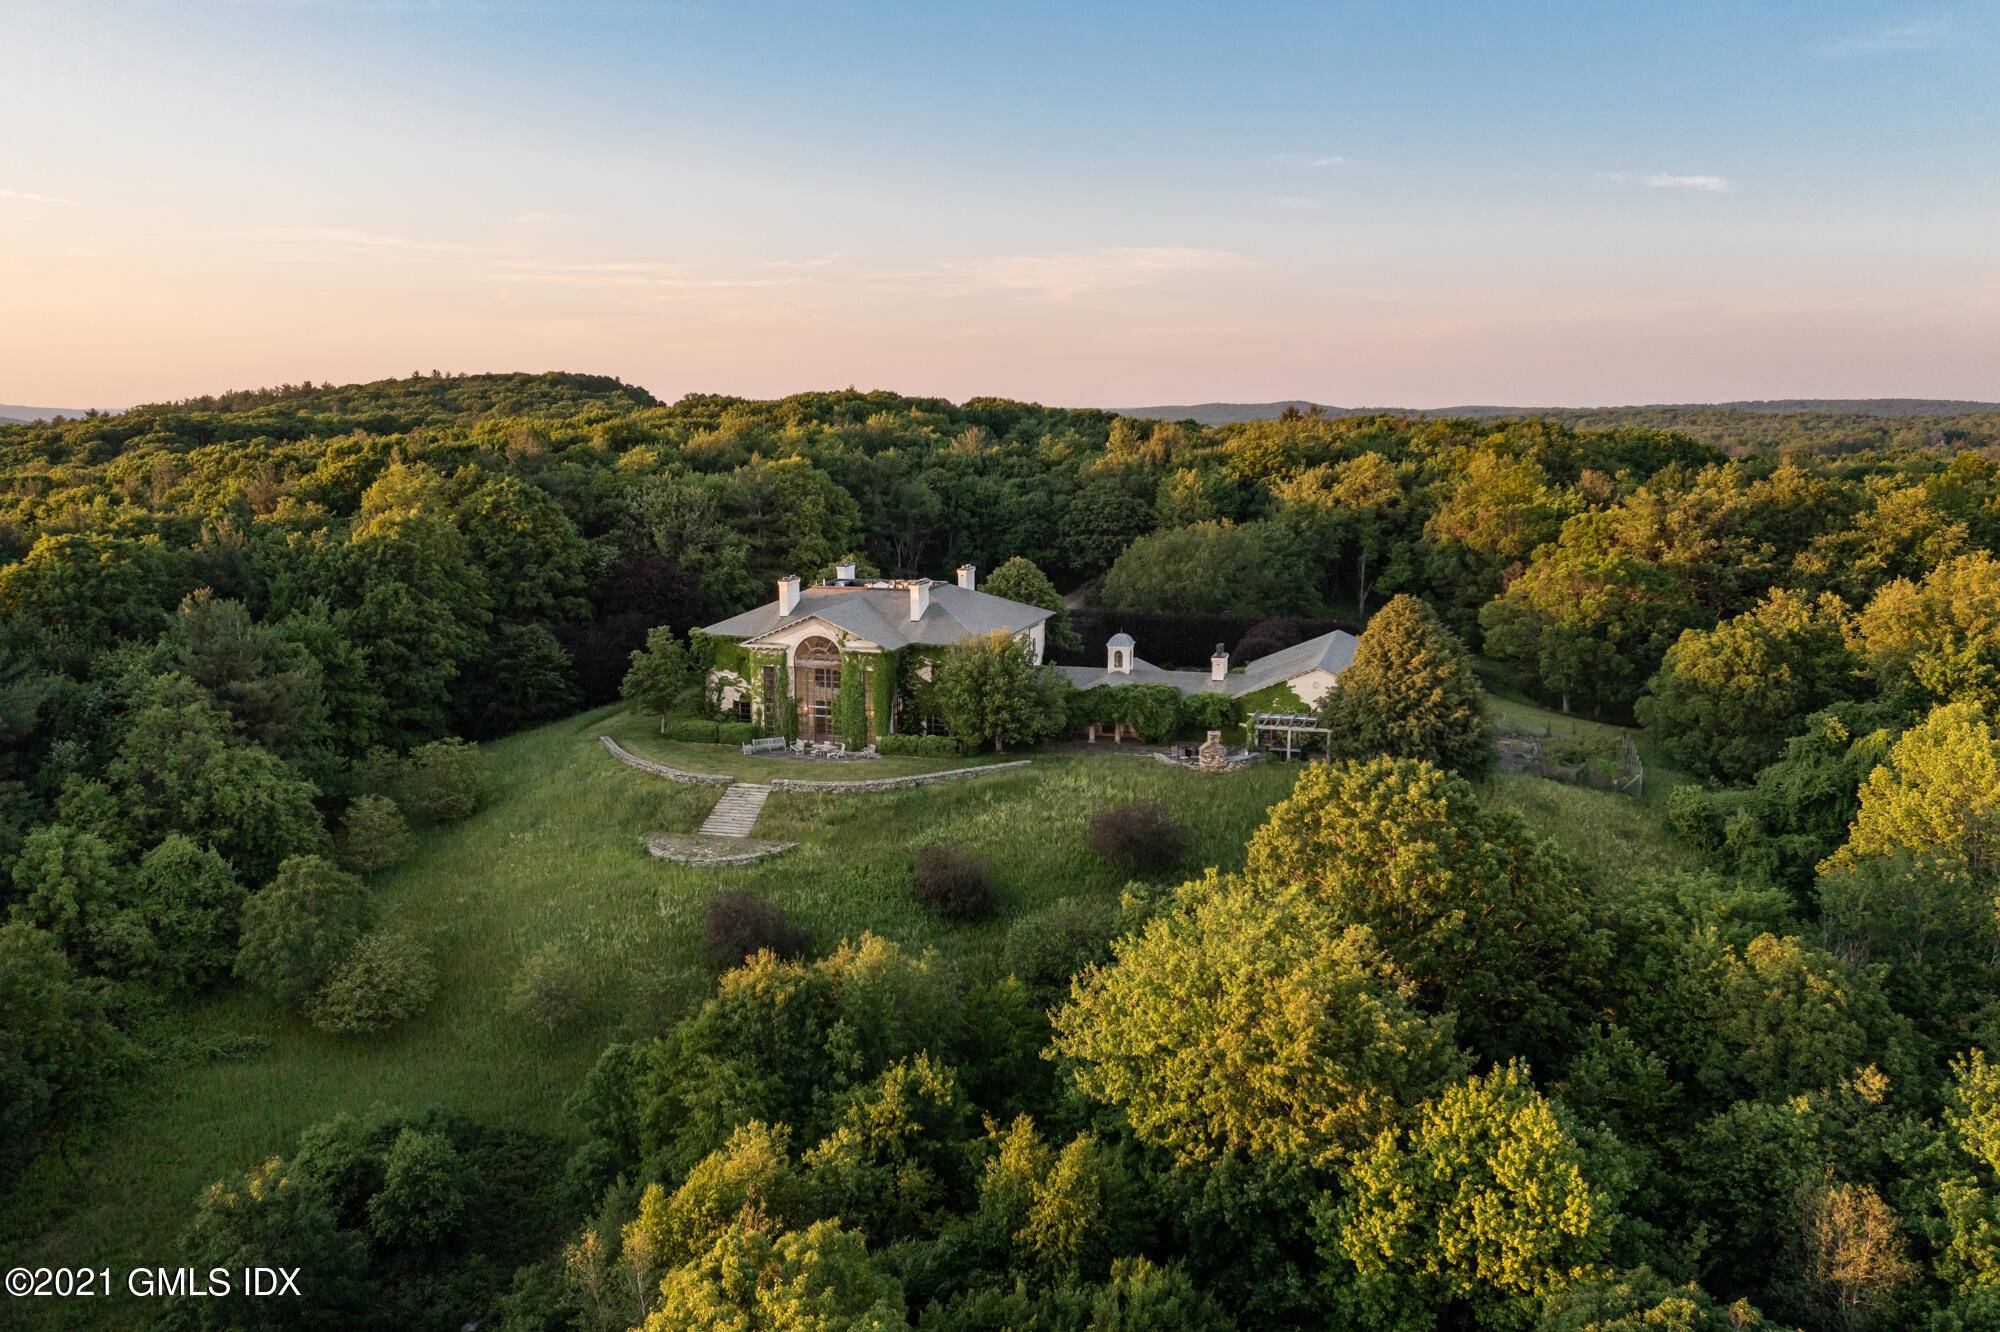 Villa Catarina A grand Tuscan style estate spectacularly situated on 1, 000 acres in the heart of Litchfield County offers unparalleled privacy and security as well as magnificent tri state ...